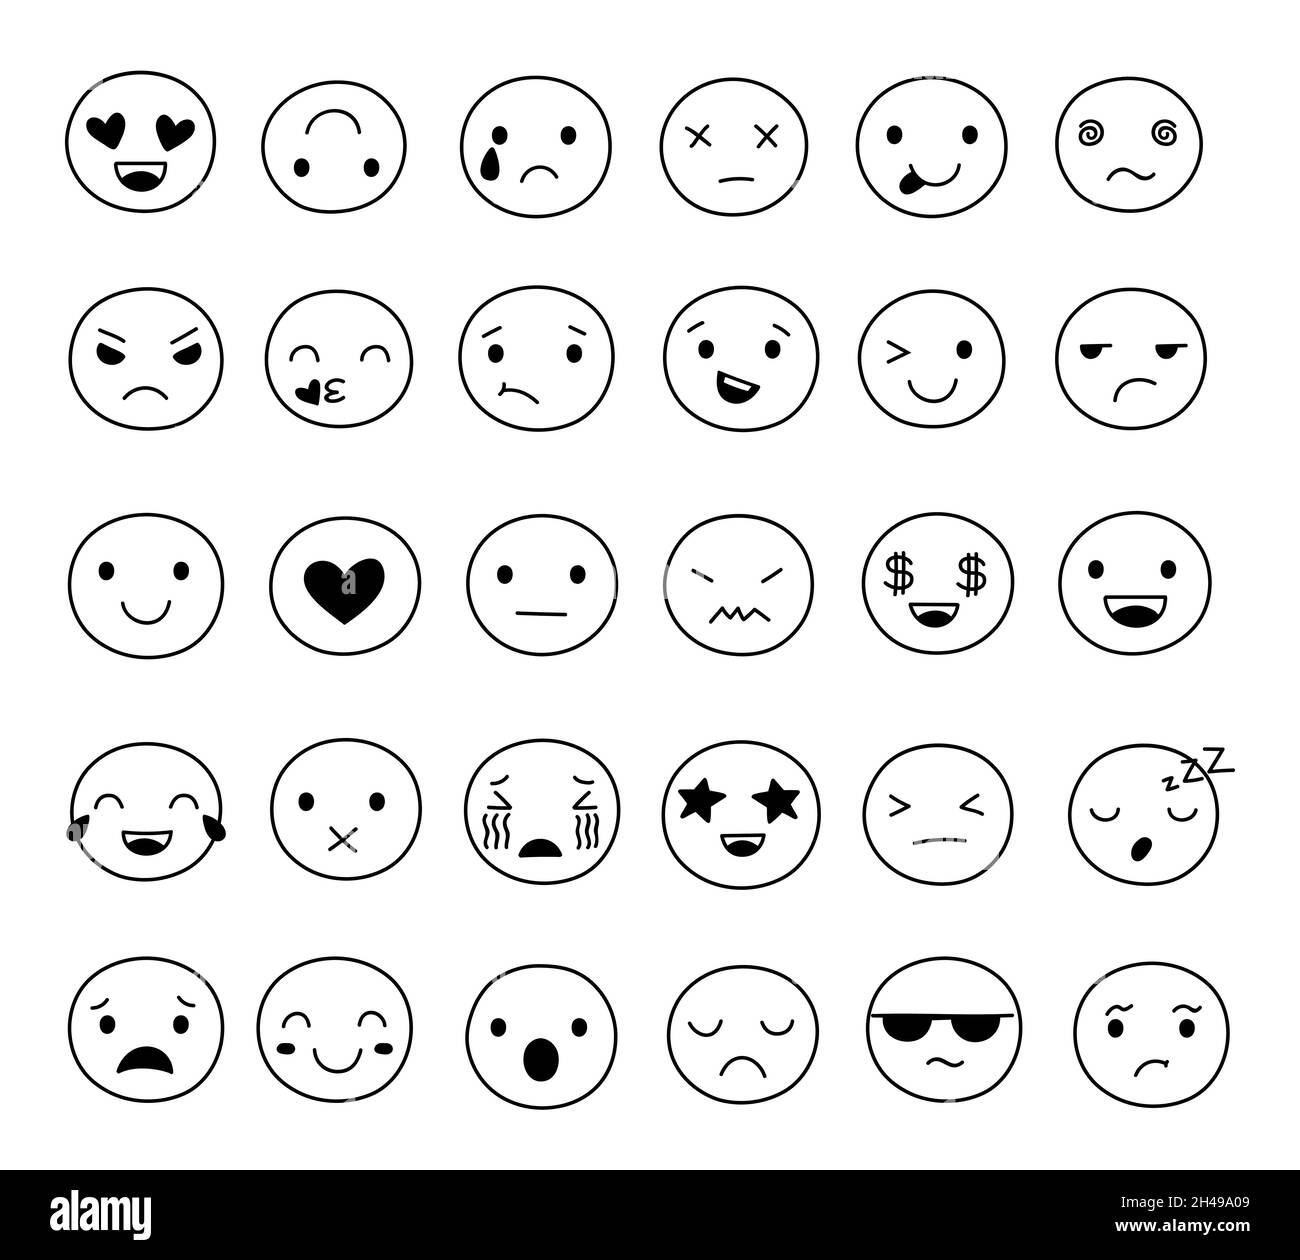 Doodle smile emoticons. Image emoticon, doodling emotional faces. Fun pictograms, isolated outline laugh sad emoji exact vector set Stock Vector